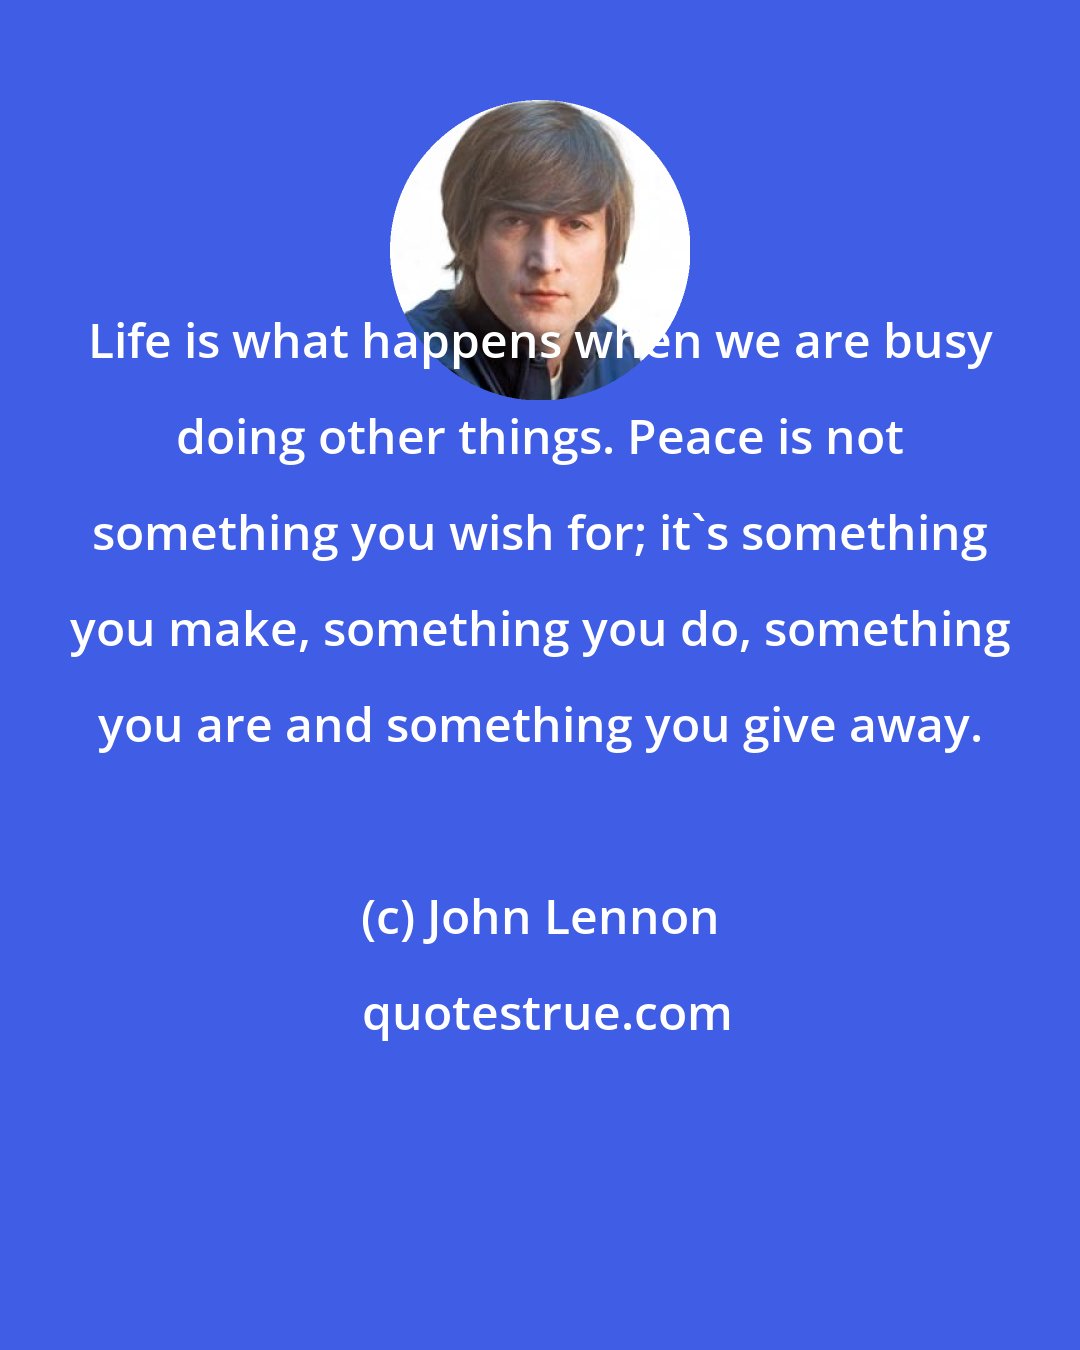 John Lennon: Life is what happens when we are busy doing other things. Peace is not something you wish for; it's something you make, something you do, something you are and something you give away.